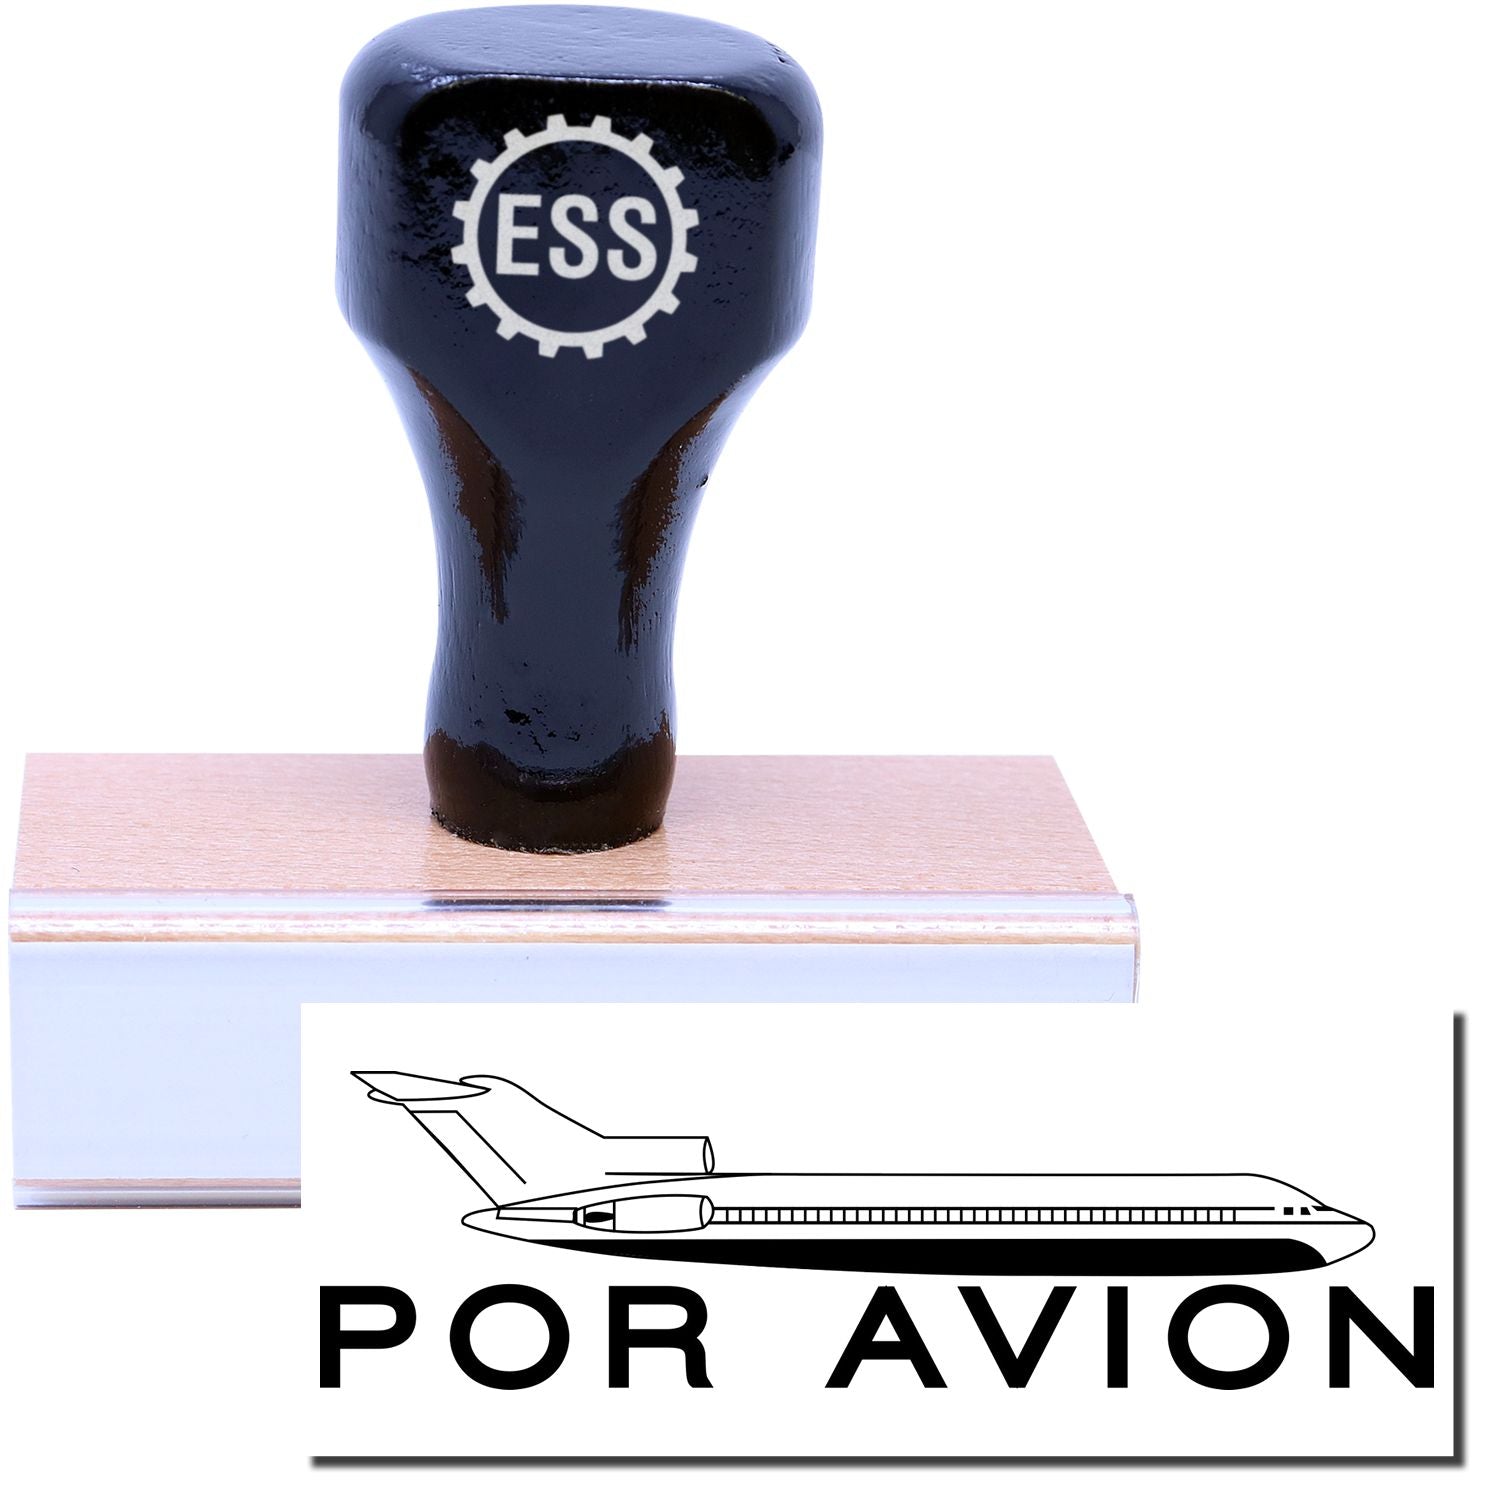 A stock office rubber stamp with a stamped image showing how the text "POR AVION" with an icon of a plane above the text is displayed after stamping.